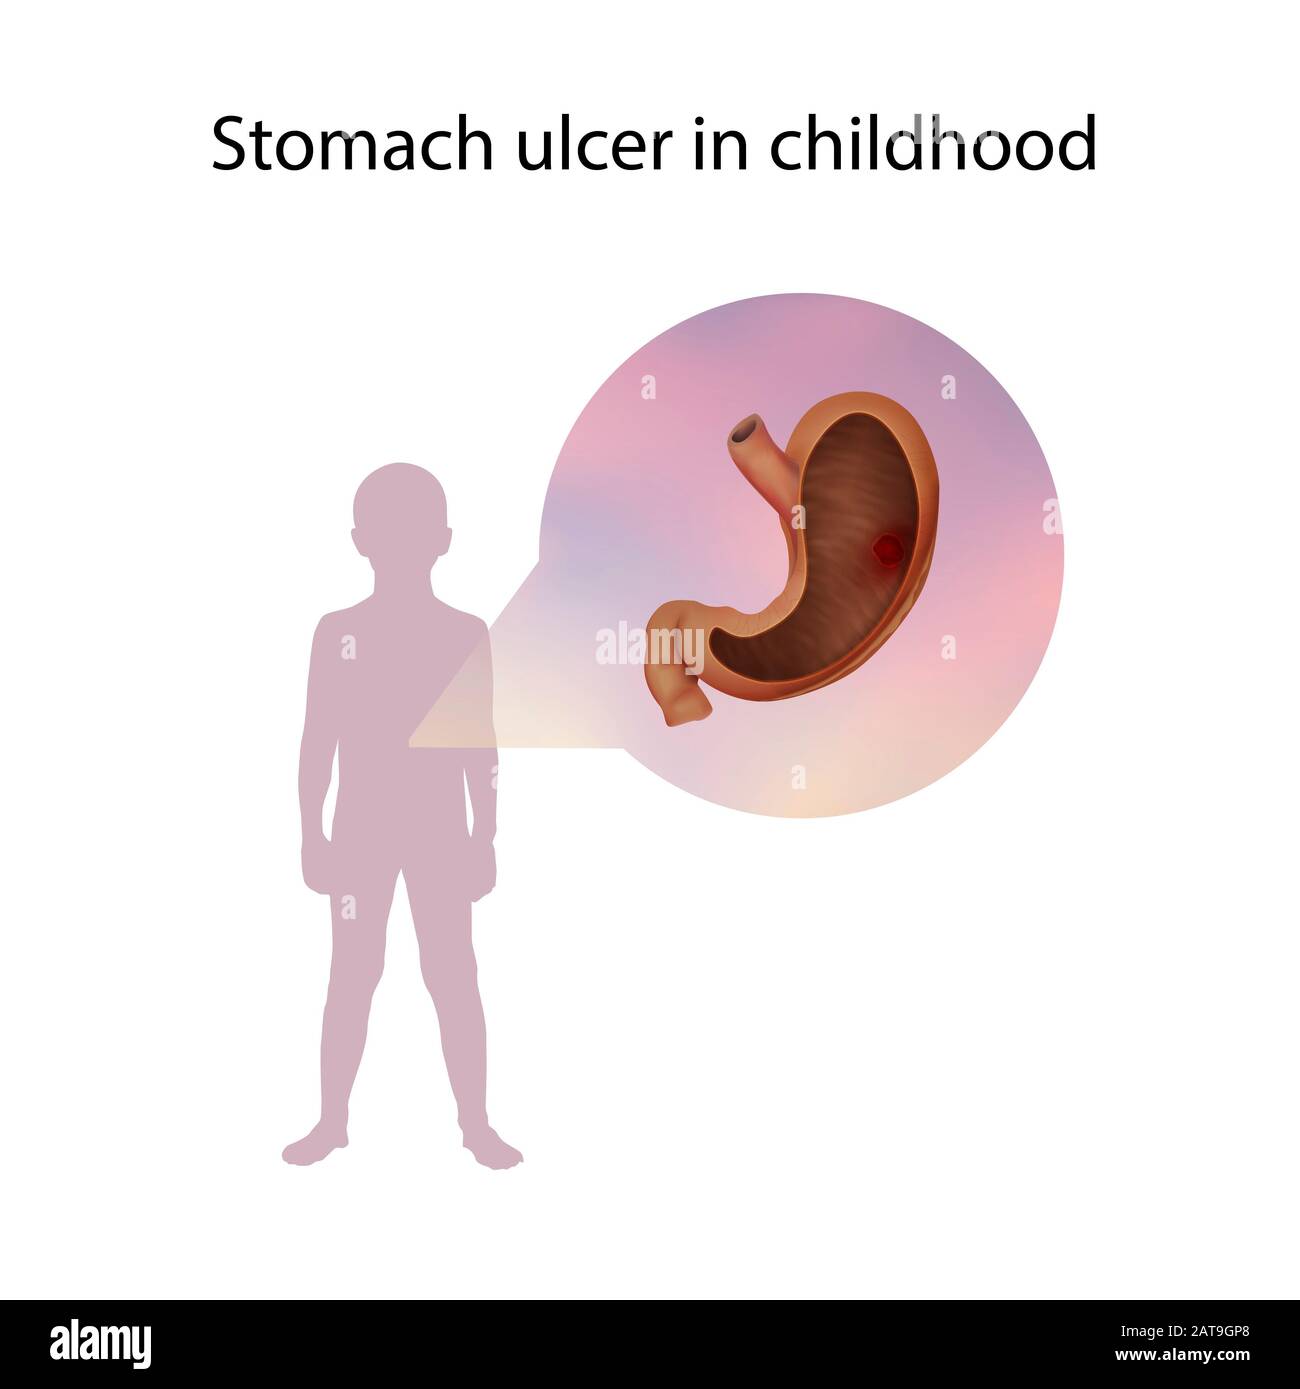 Stomach ulcer in childhood, illustration Stock Photo